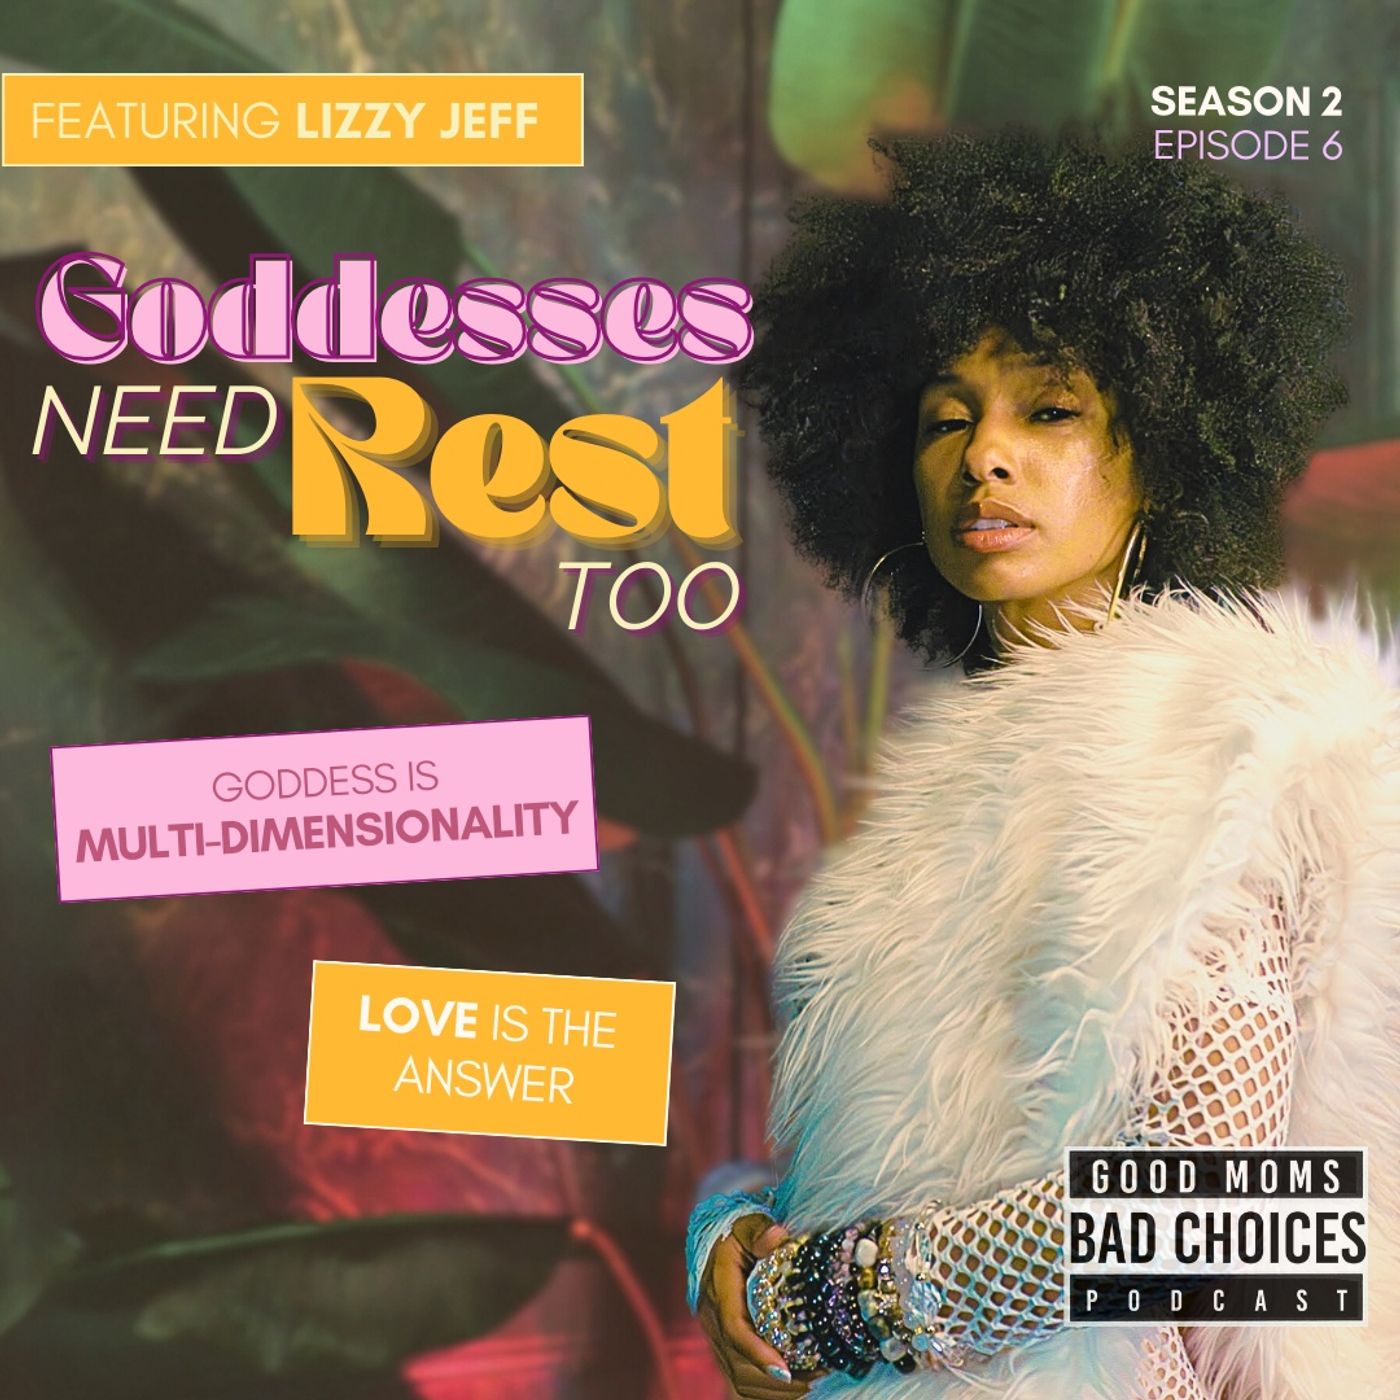 Goddesses Need Rest Too Feat. Lizzy Jeff